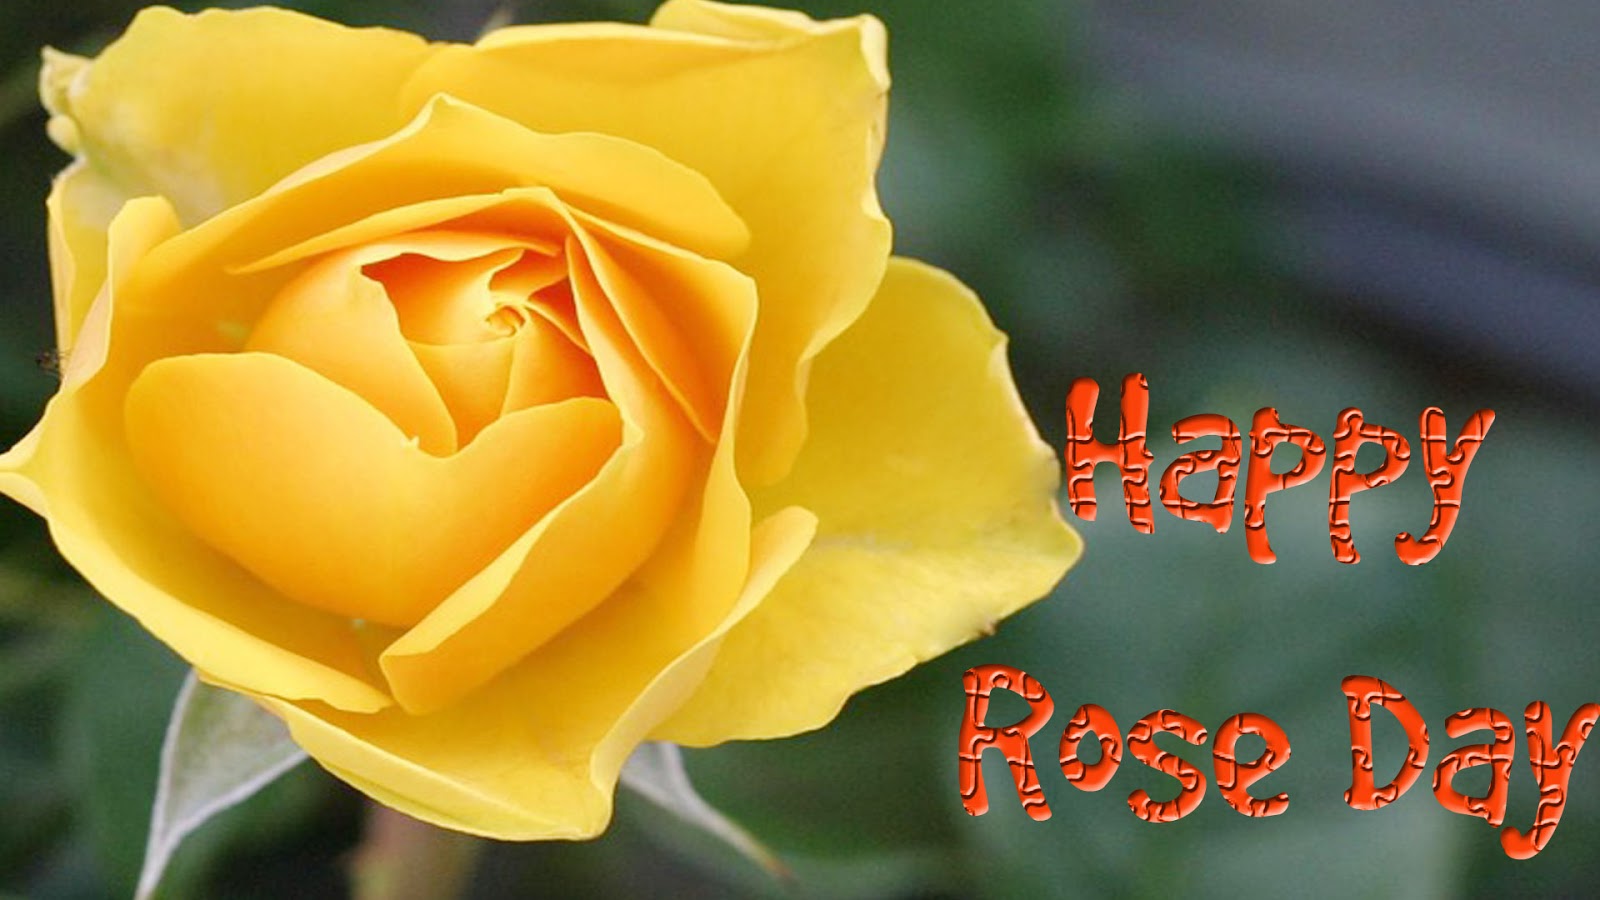 Free download Hd Rose Day Wallpapers Good Morning Yellow Roses ...